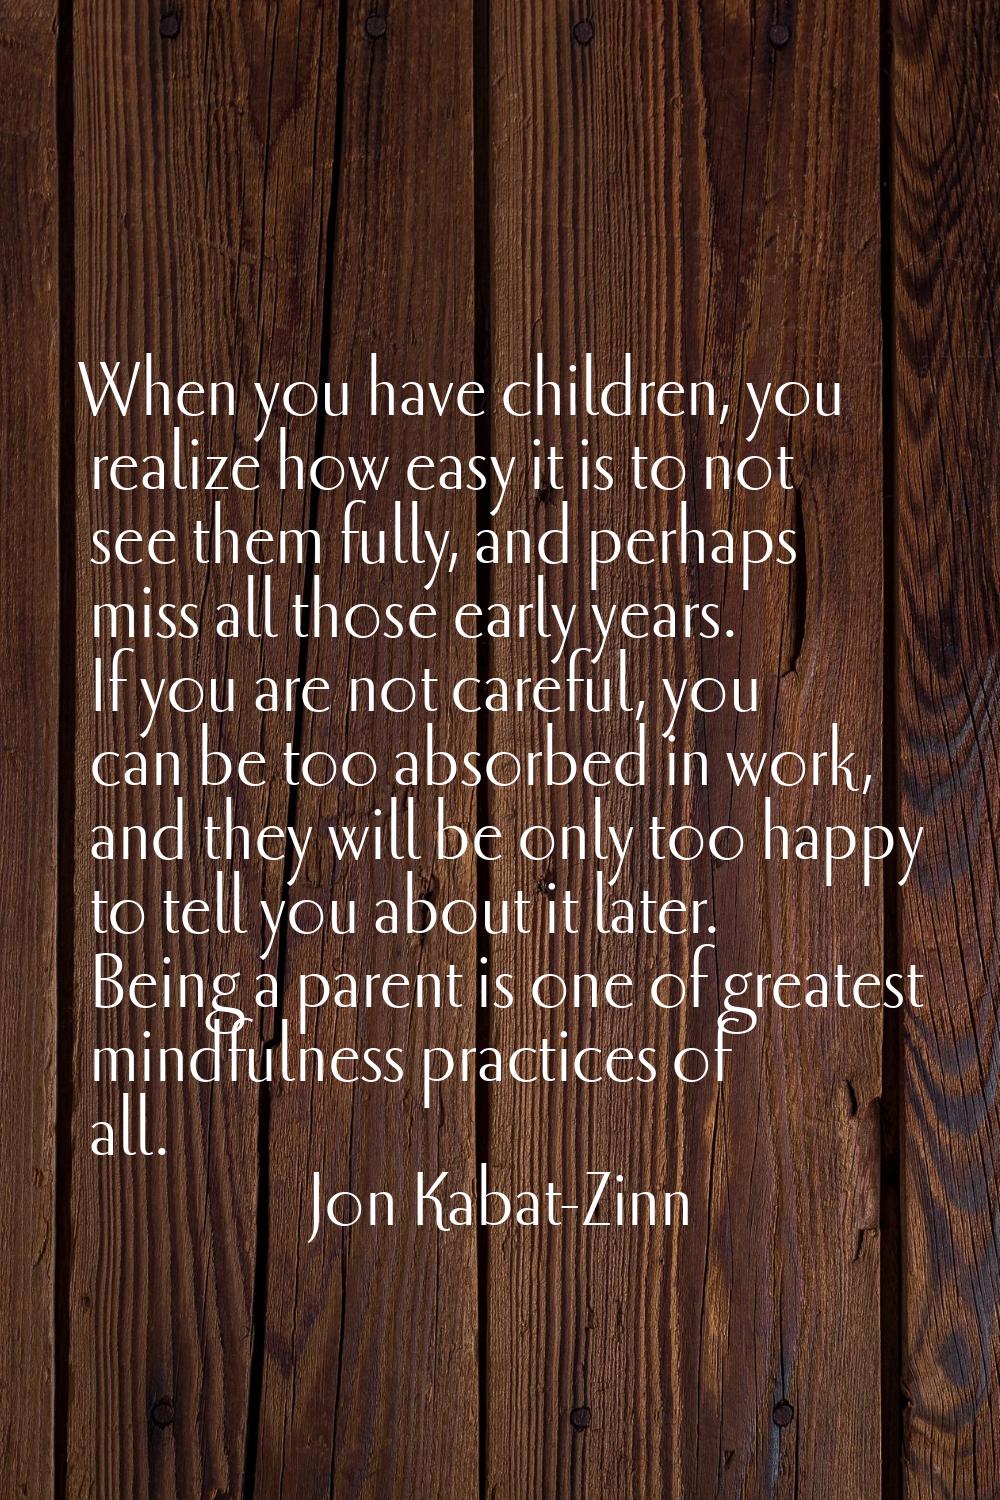 When you have children, you realize how easy it is to not see them fully, and perhaps miss all thos